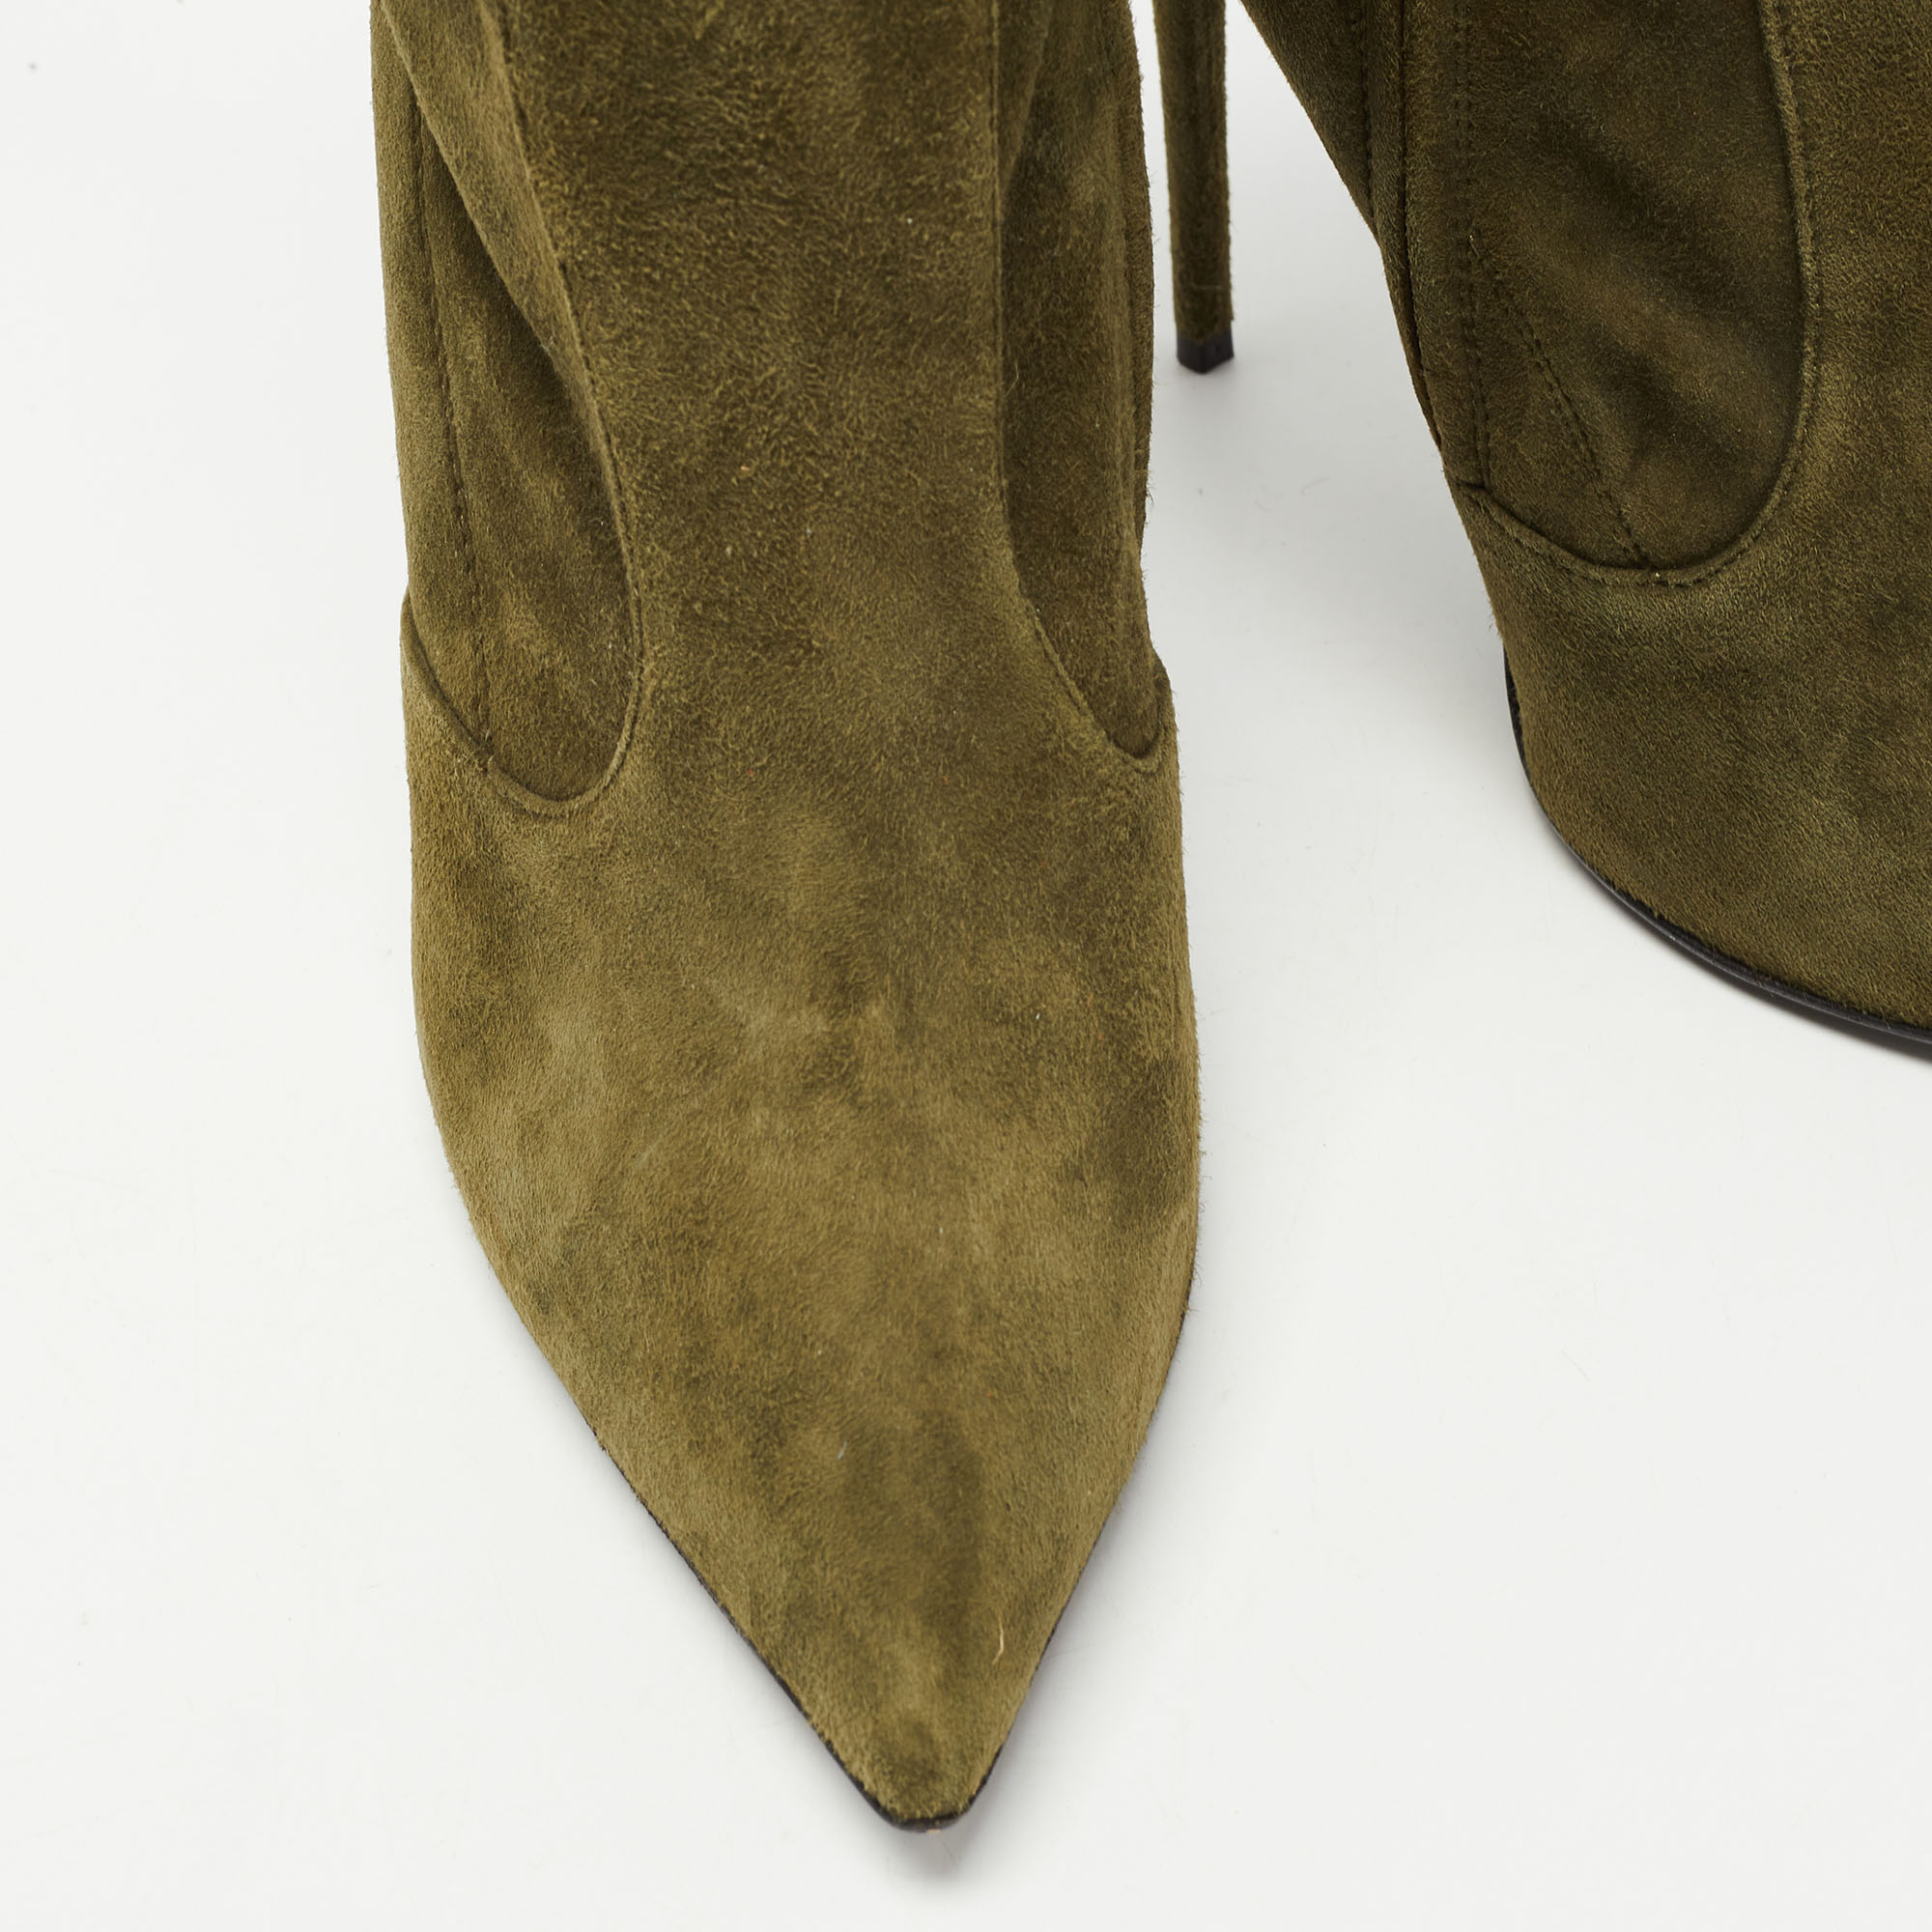 Giuseppe Zanotti Green Suede Ankle Boots Size 40